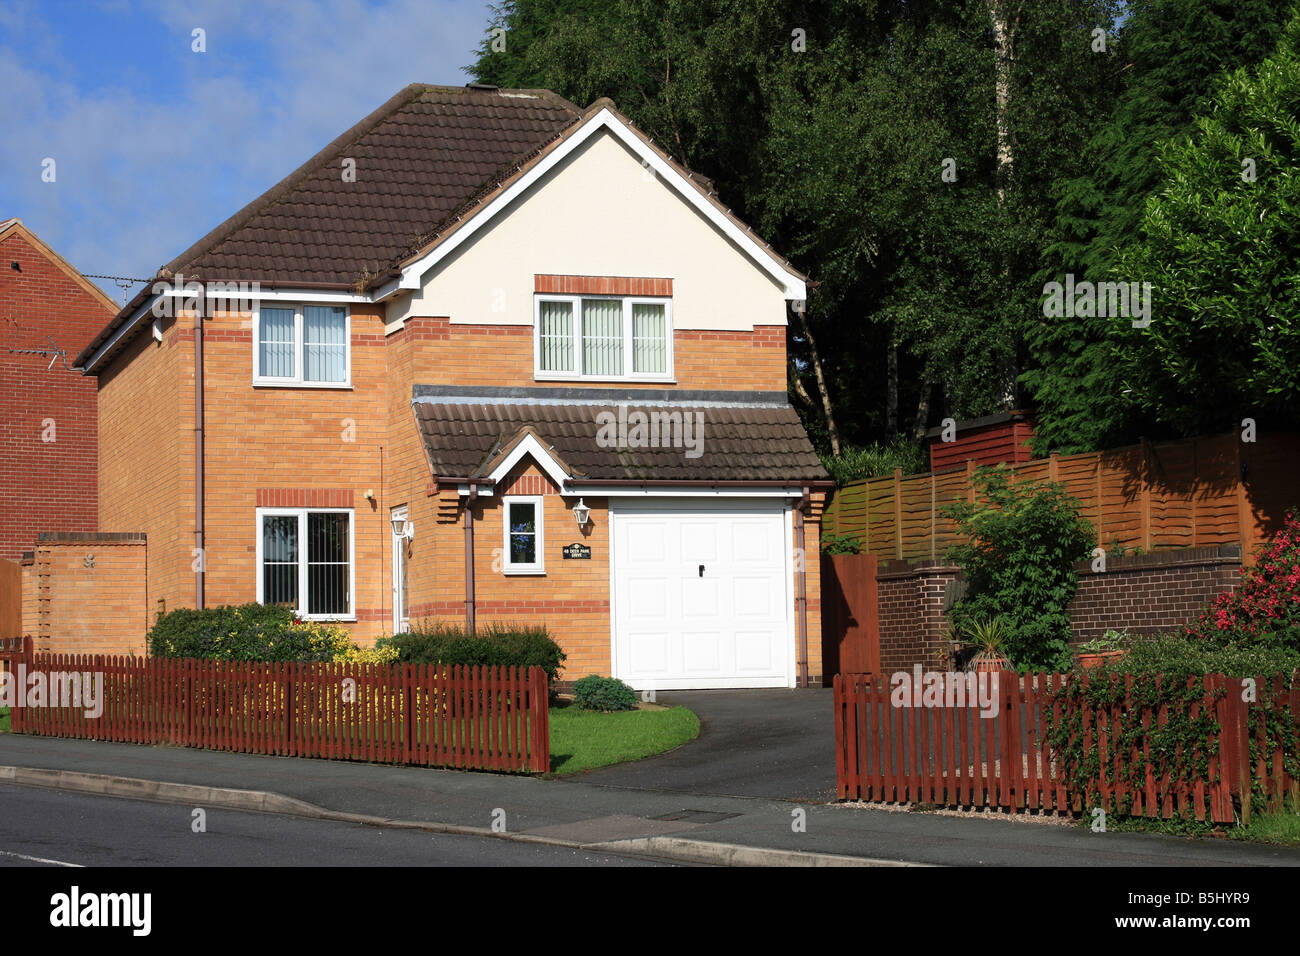 A modern detached house with garage Stock Photo